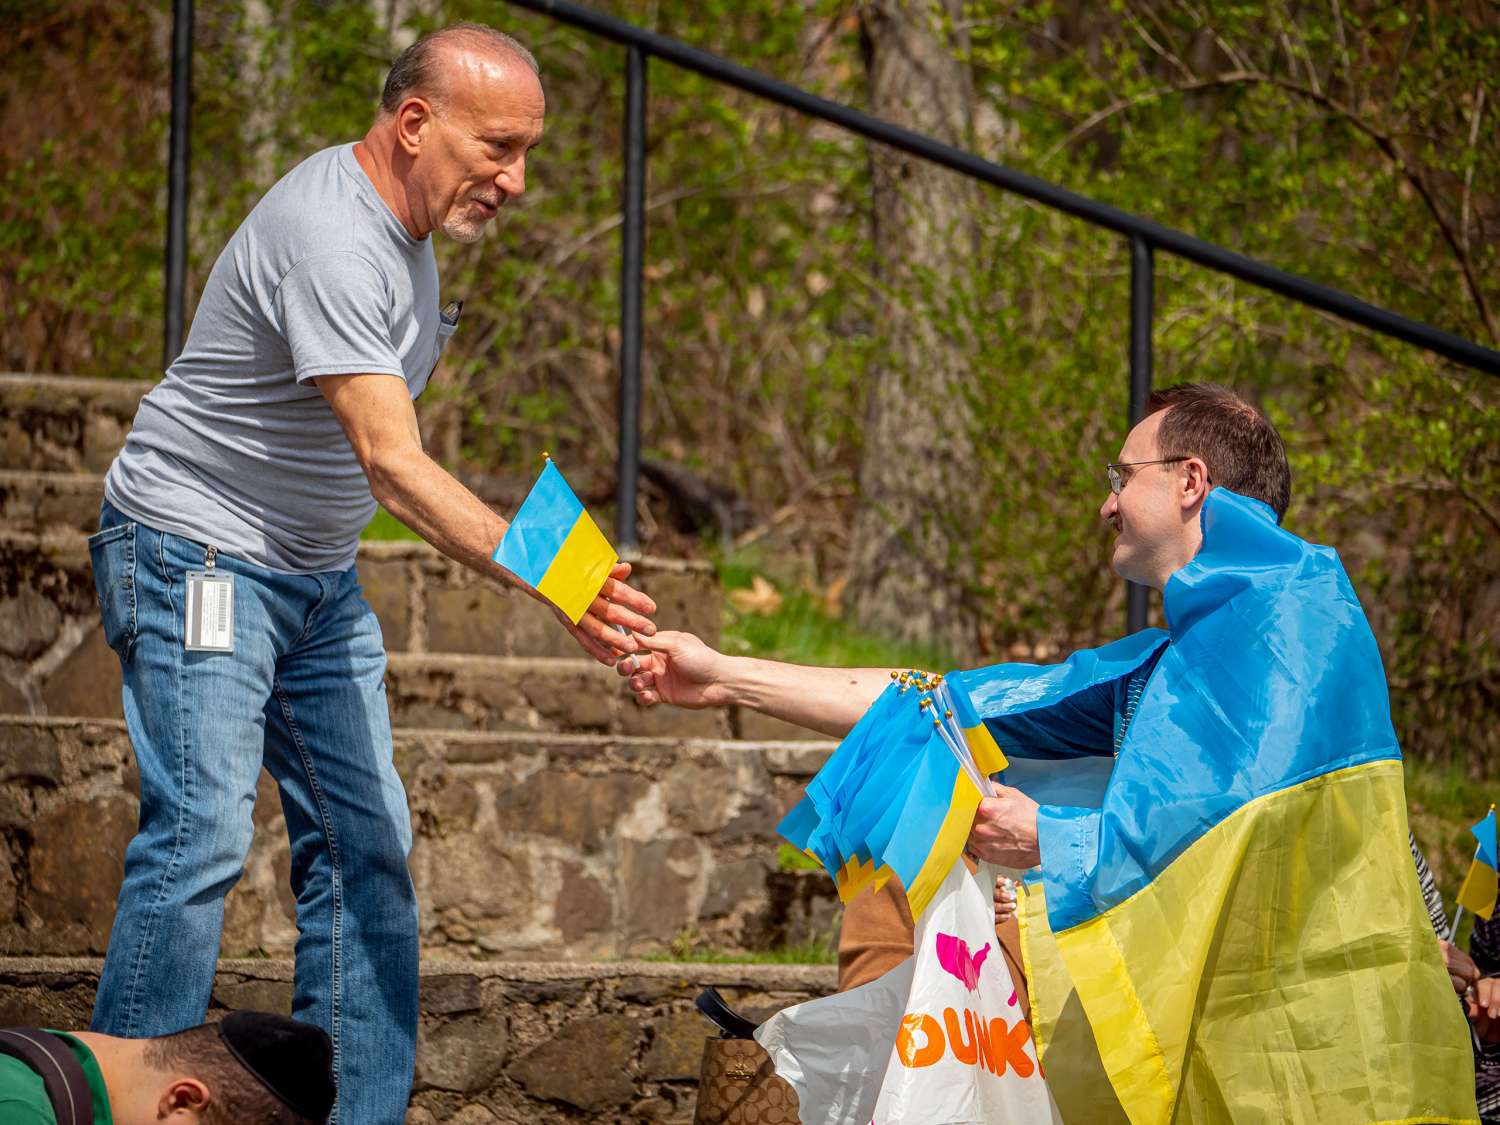 Man draped in ukranian flag hands small flag to another man.